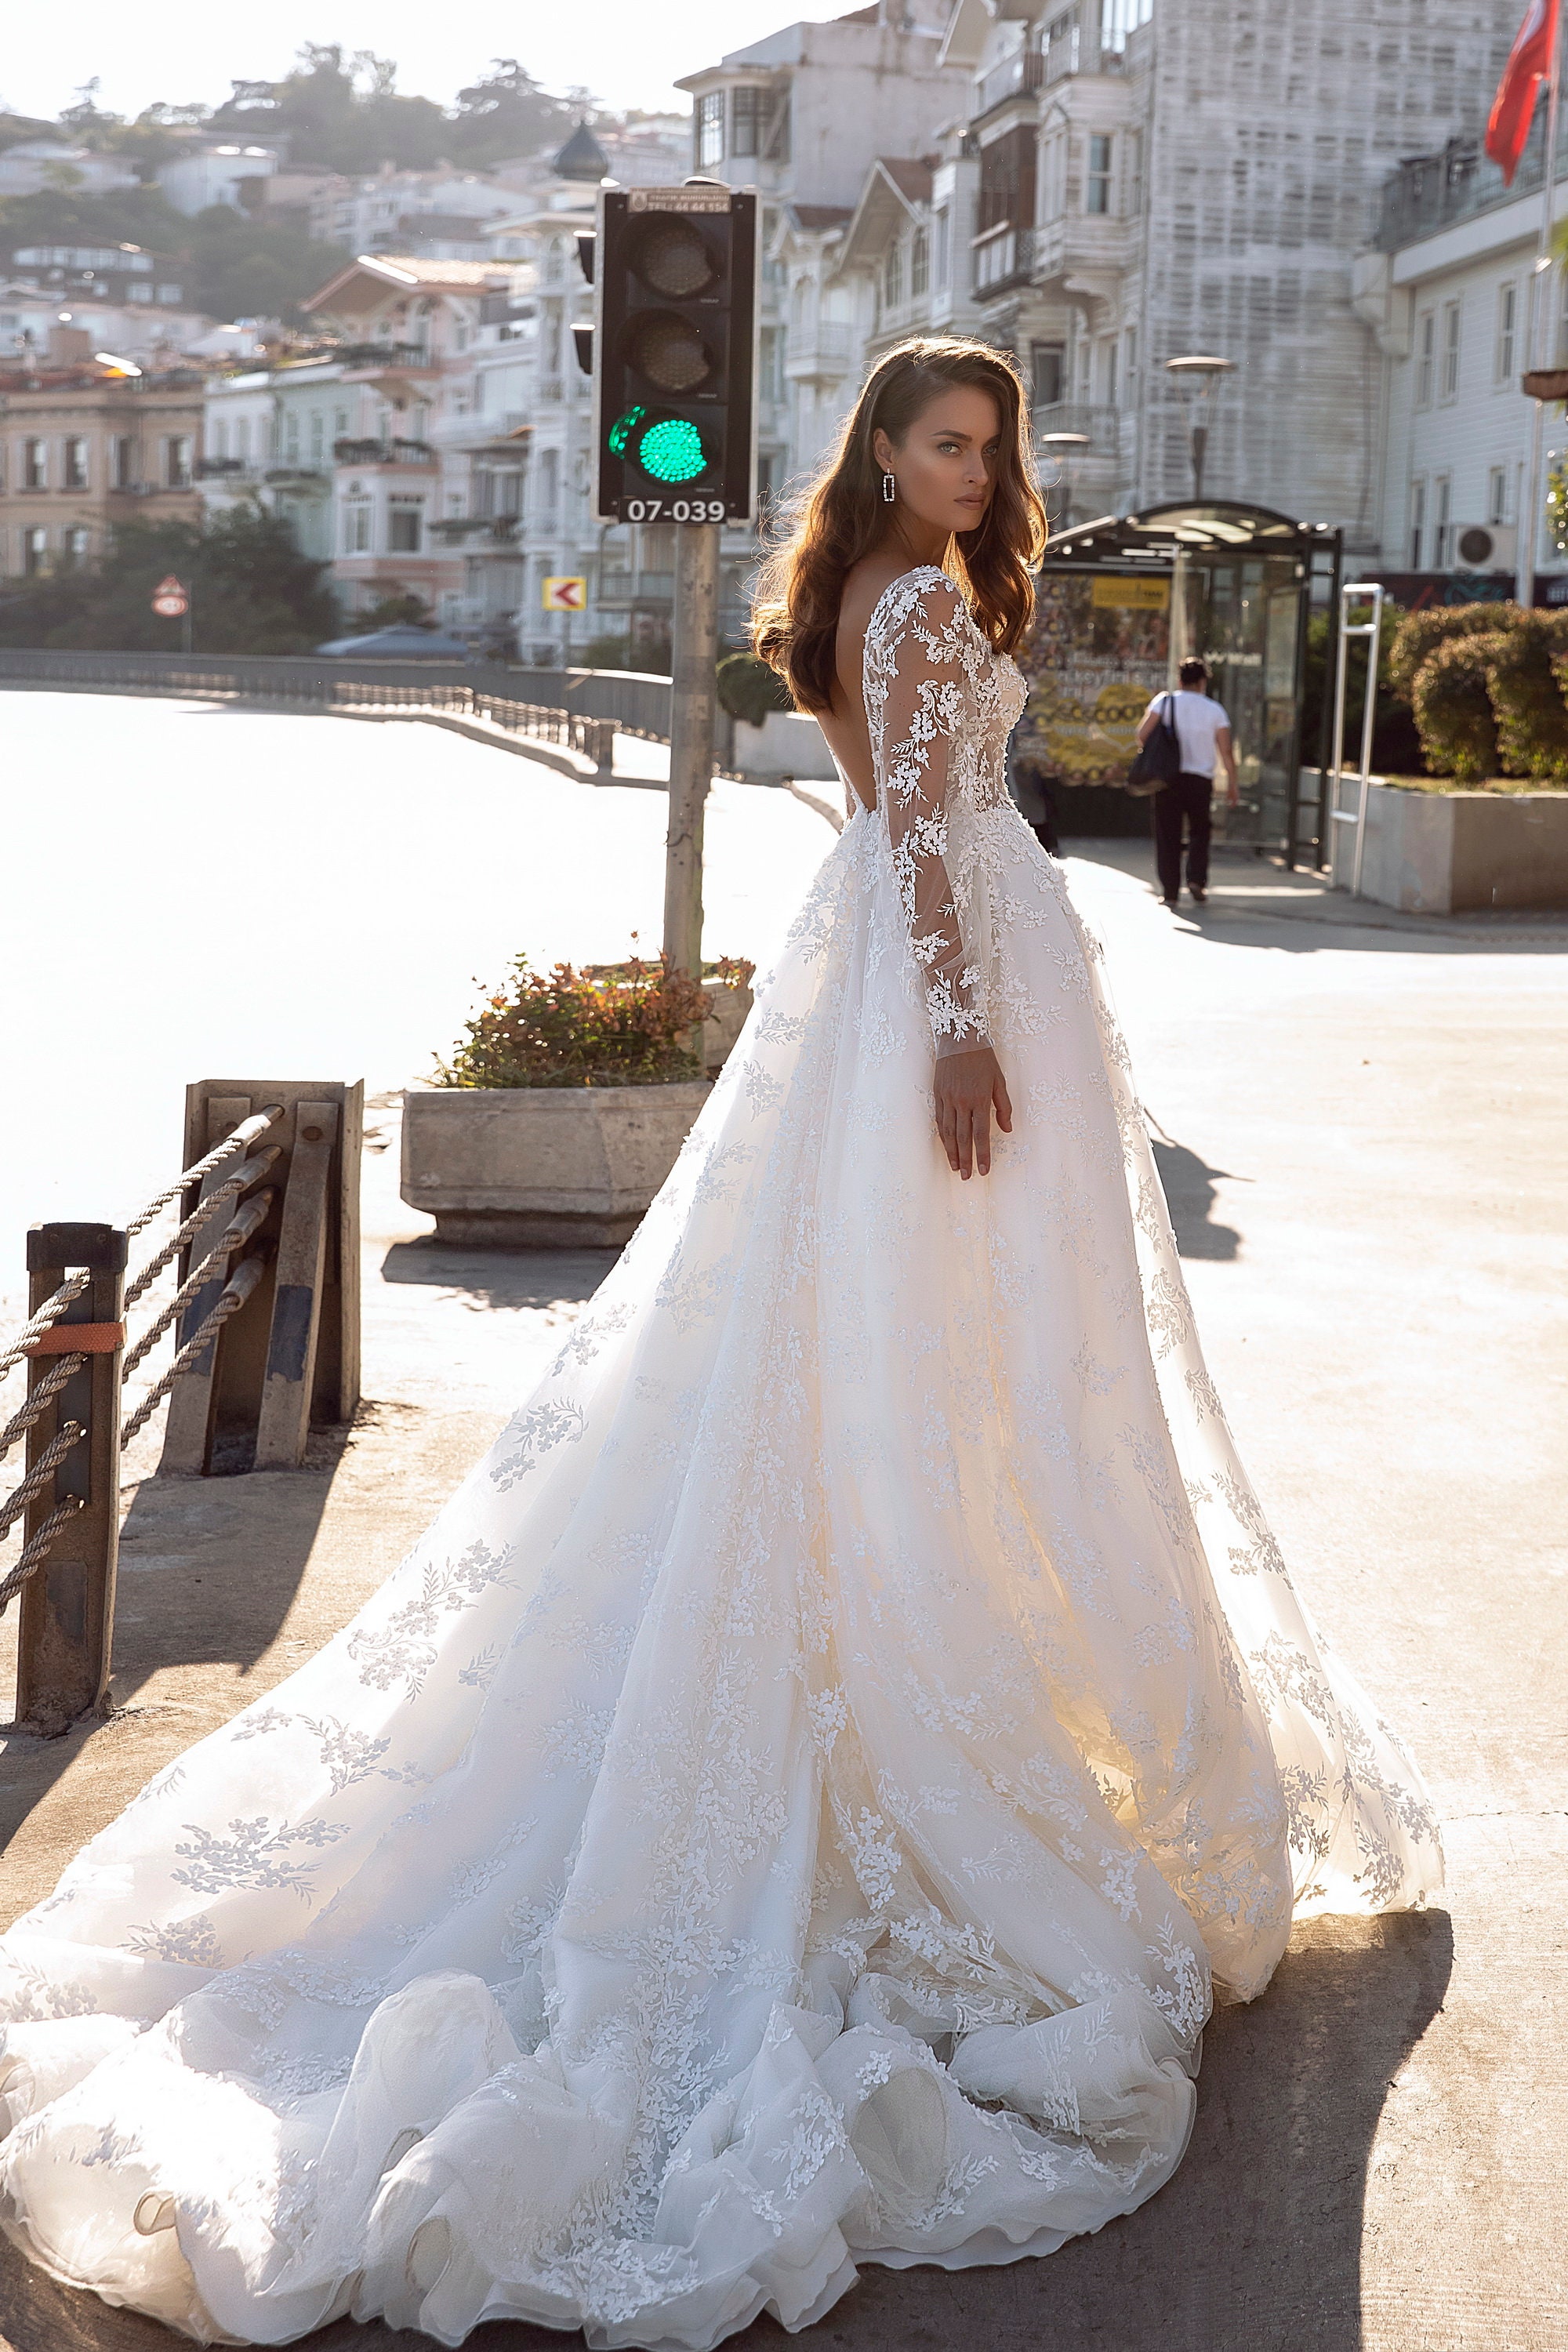 Incredible Lace Wedding Dress Made of Fine Chantilly. Lace Dress With Long  Sleeves Openwork Floor-length Dress With a Magnificent Lace Train -   Canada